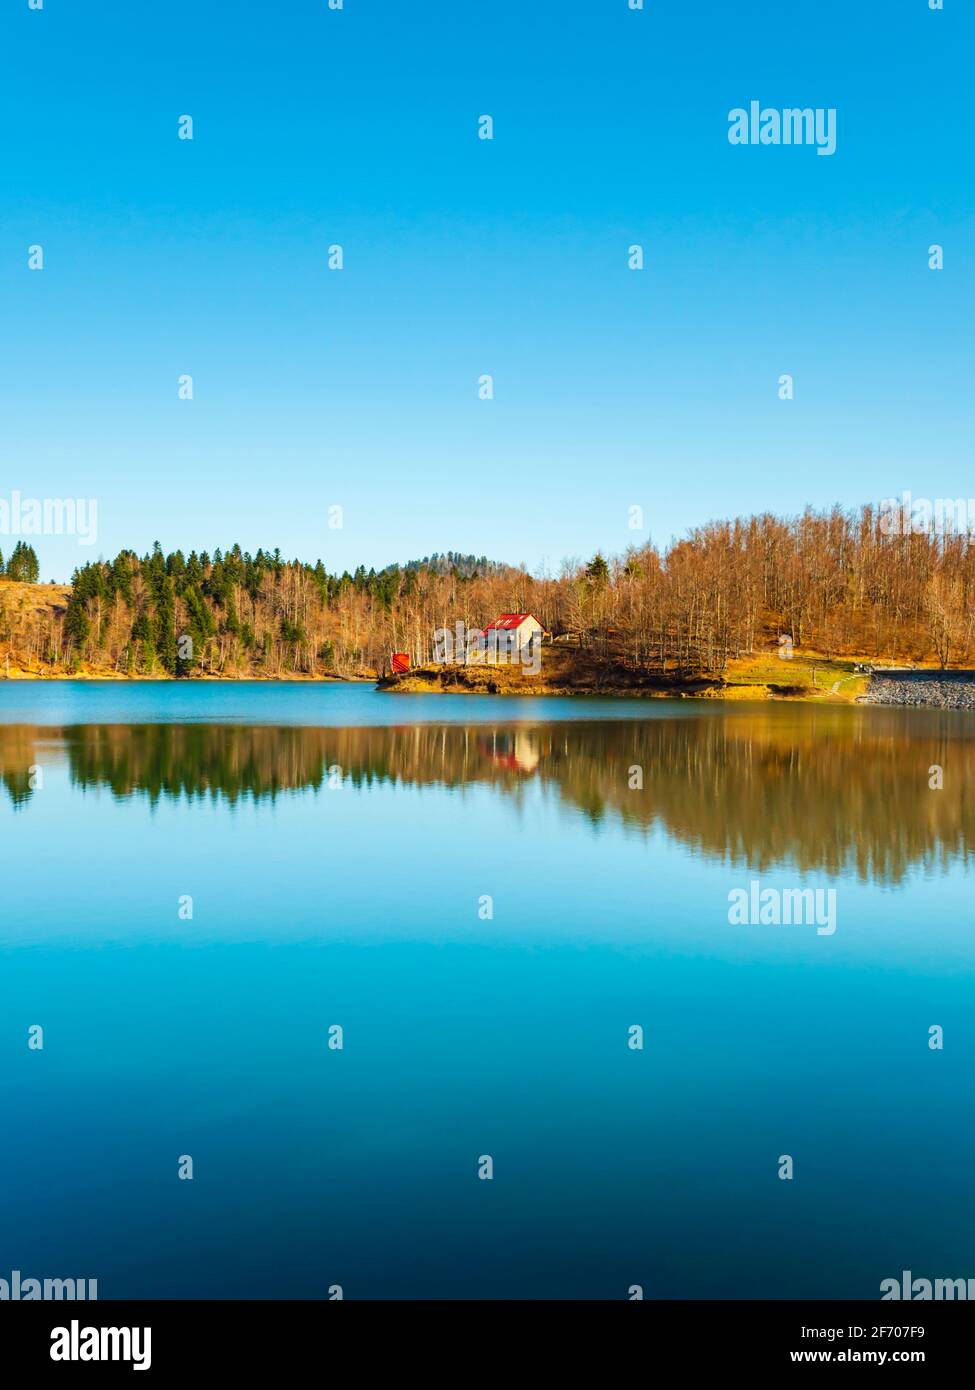 Picturesque peaceful tranquility Lokve lake in Croatia Europe Stock Photo